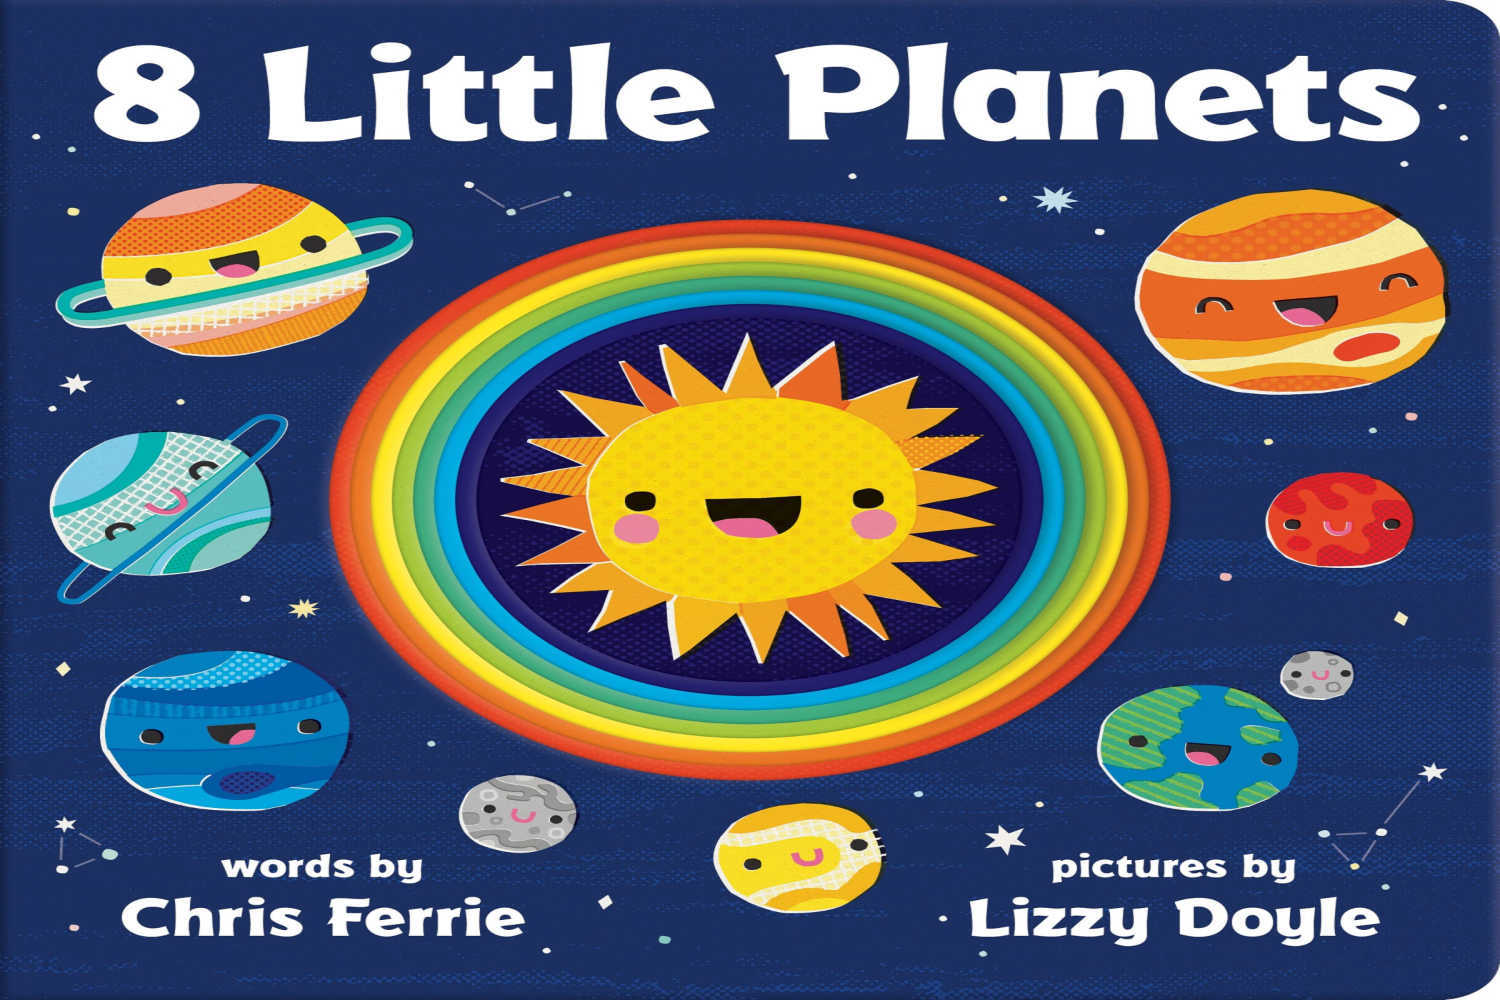 8 Little Planets by Chris Ferrie